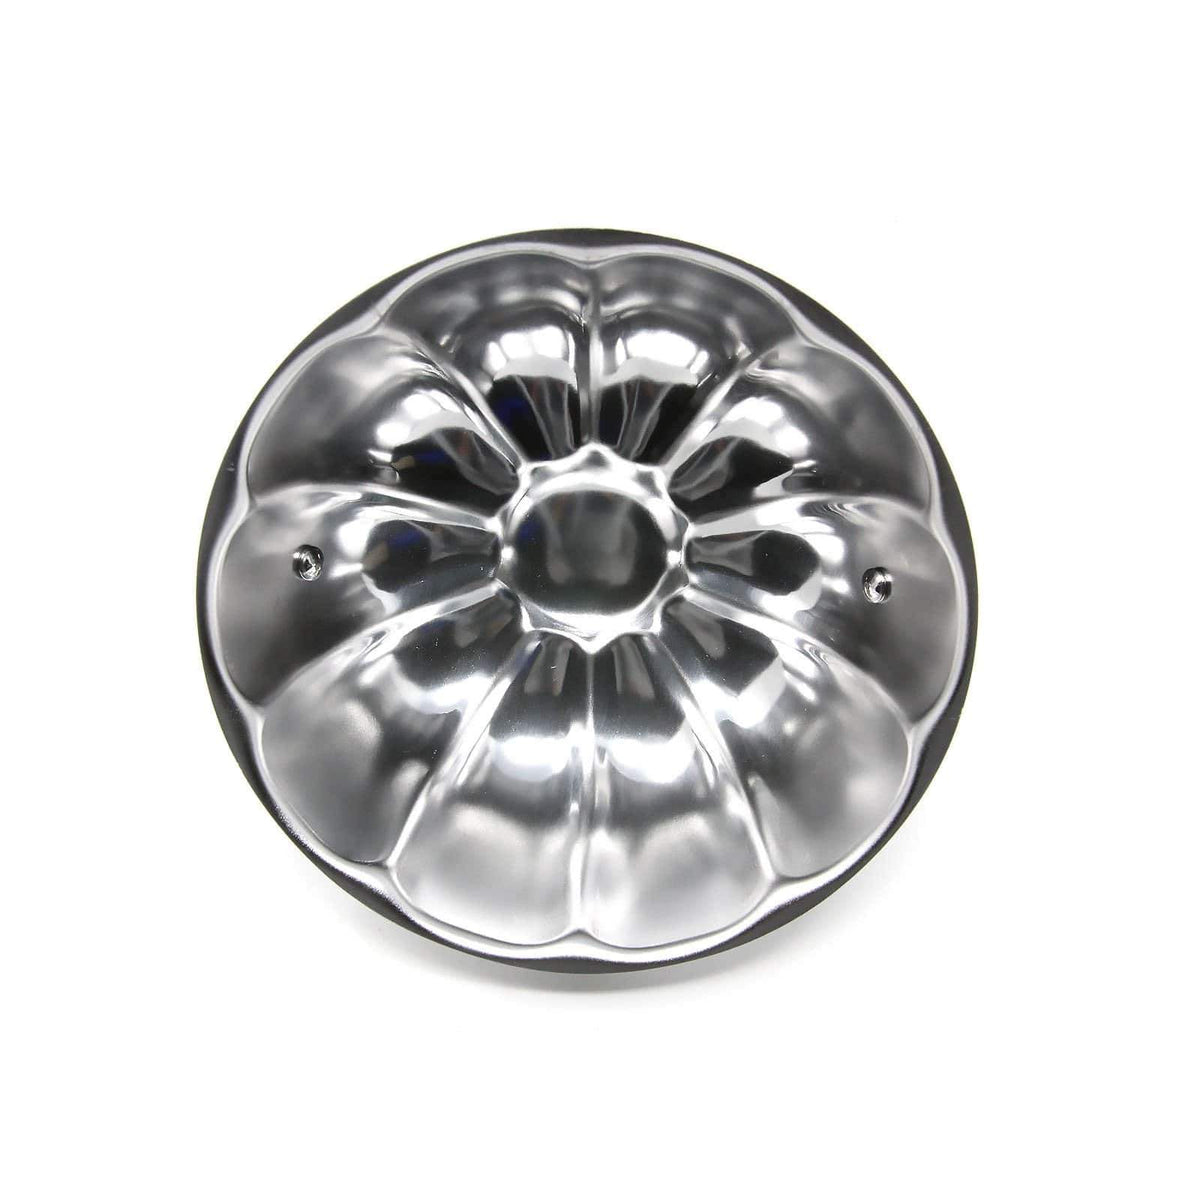 Shimotori Stainless Steel Restaurant Style Rice Mold (Flower) Food Molds